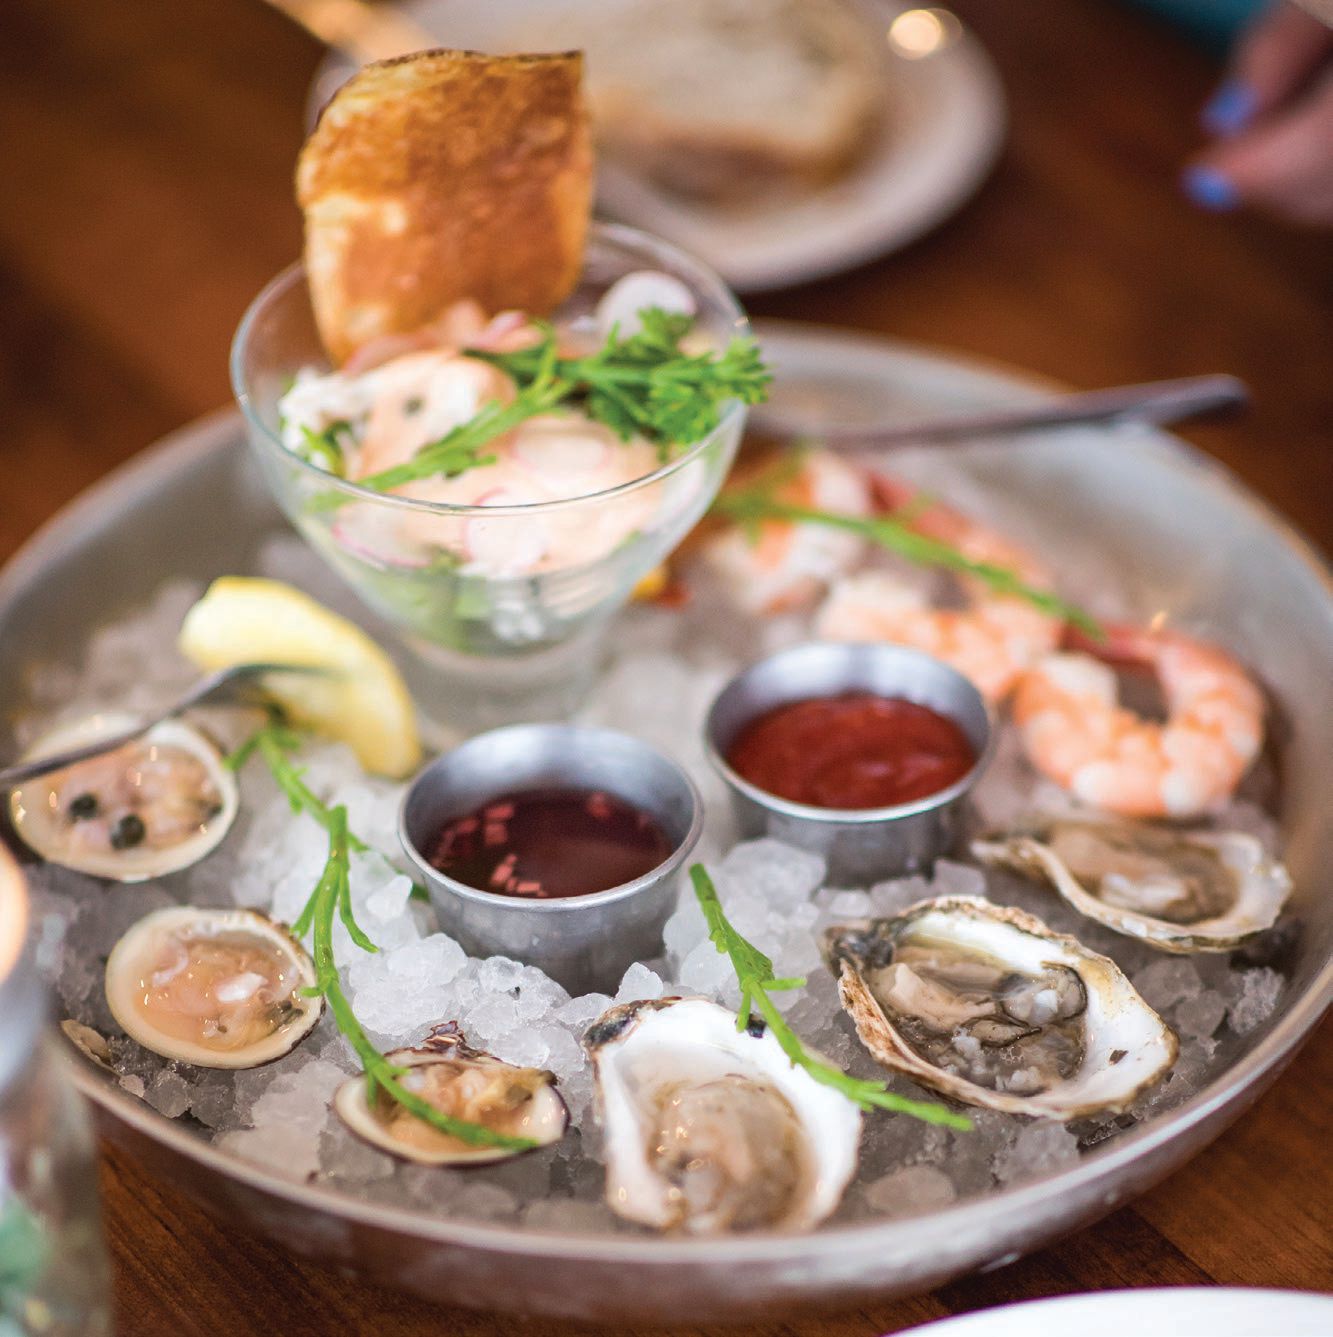  Signature oysters from Bostwick’s. PHOTO COURTESY OF BOSTWICK’S ON THE HARBOR